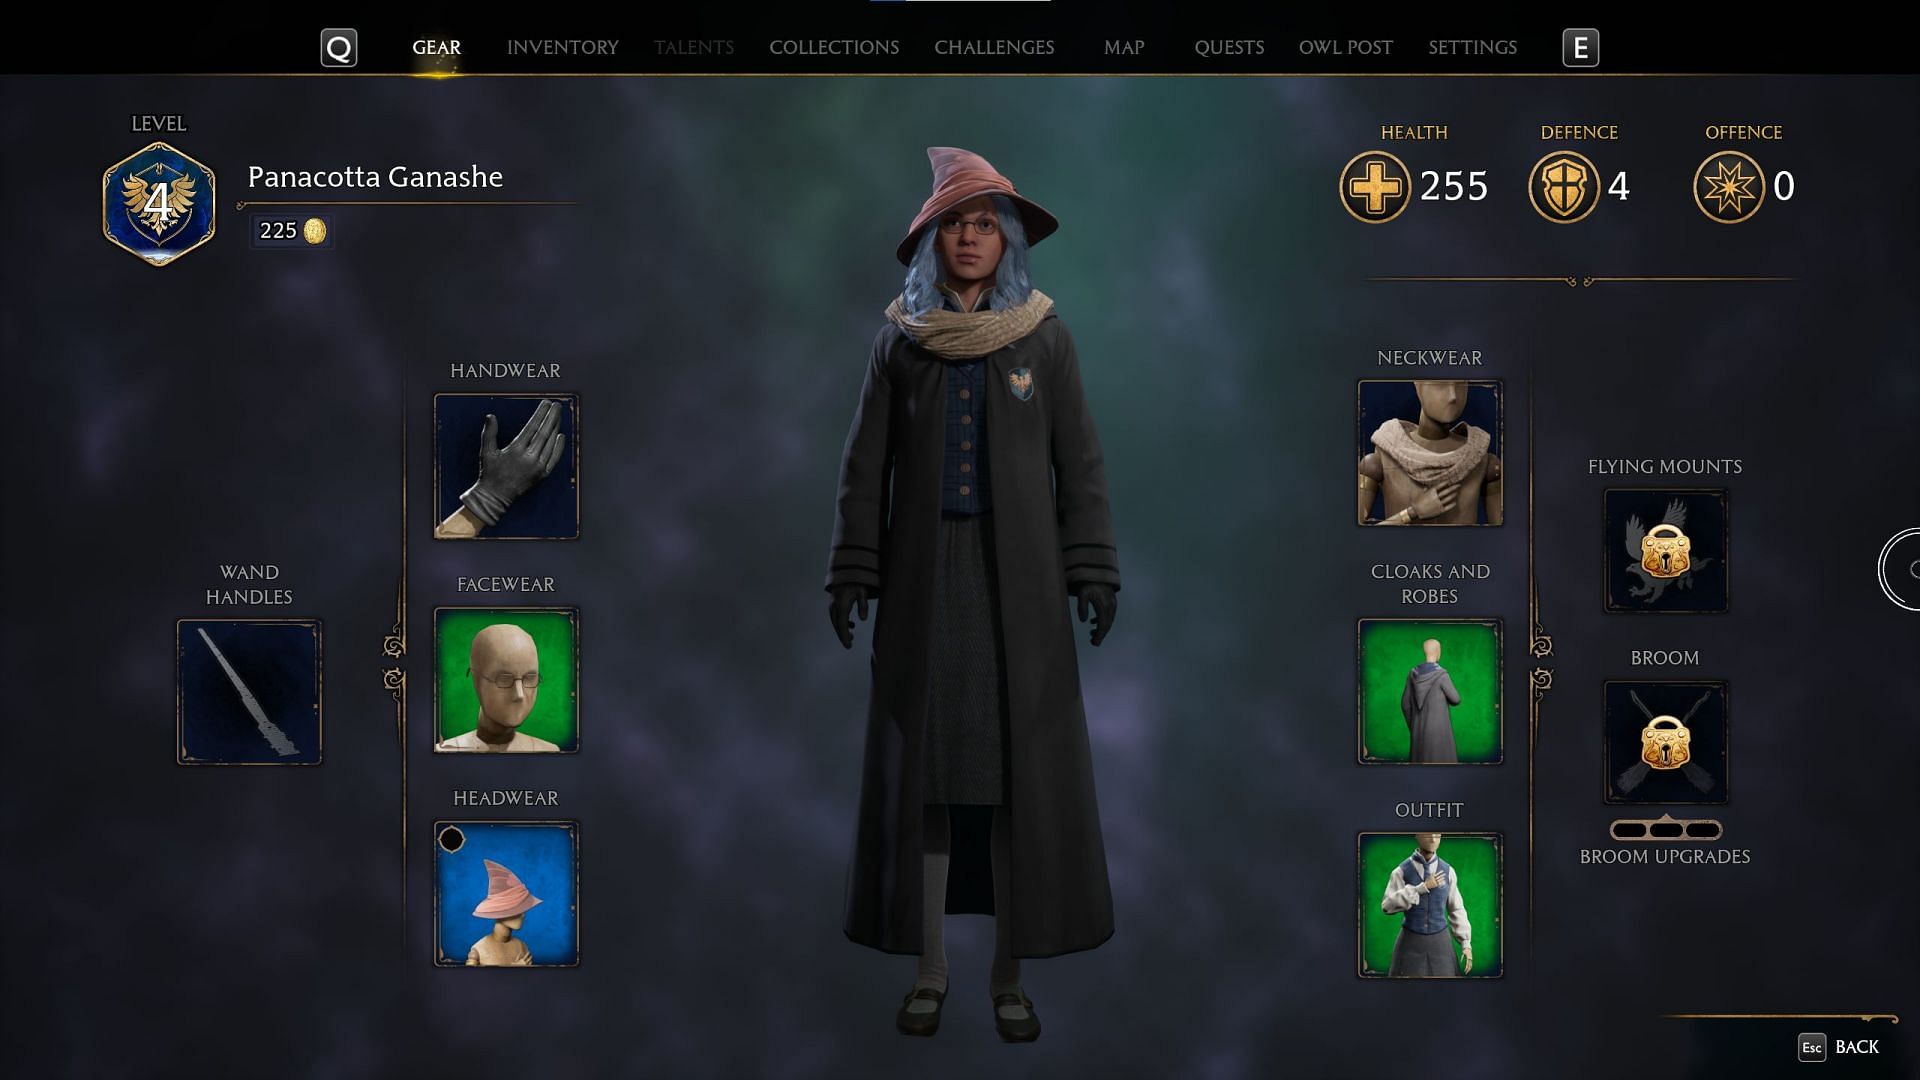 Hogwarts Legacy Gear Traits cannot be removed irrespective of armament rarity (image via Hogwarts Legacy)